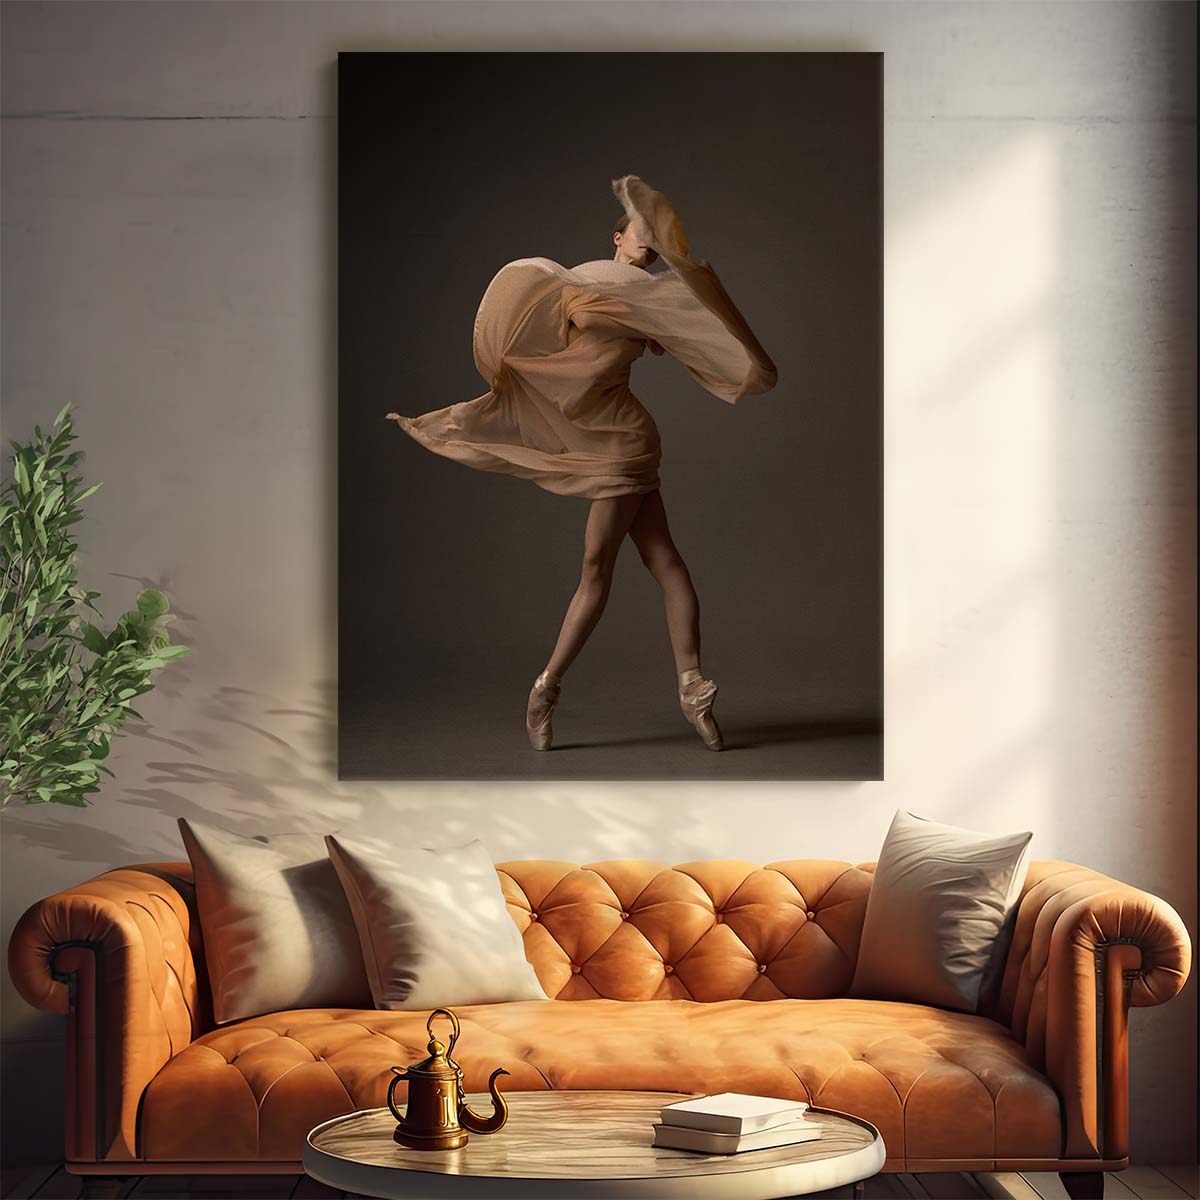 Golden Ballerina Dance Performance Fabric Photography Art by Luxuriance Designs, made in USA